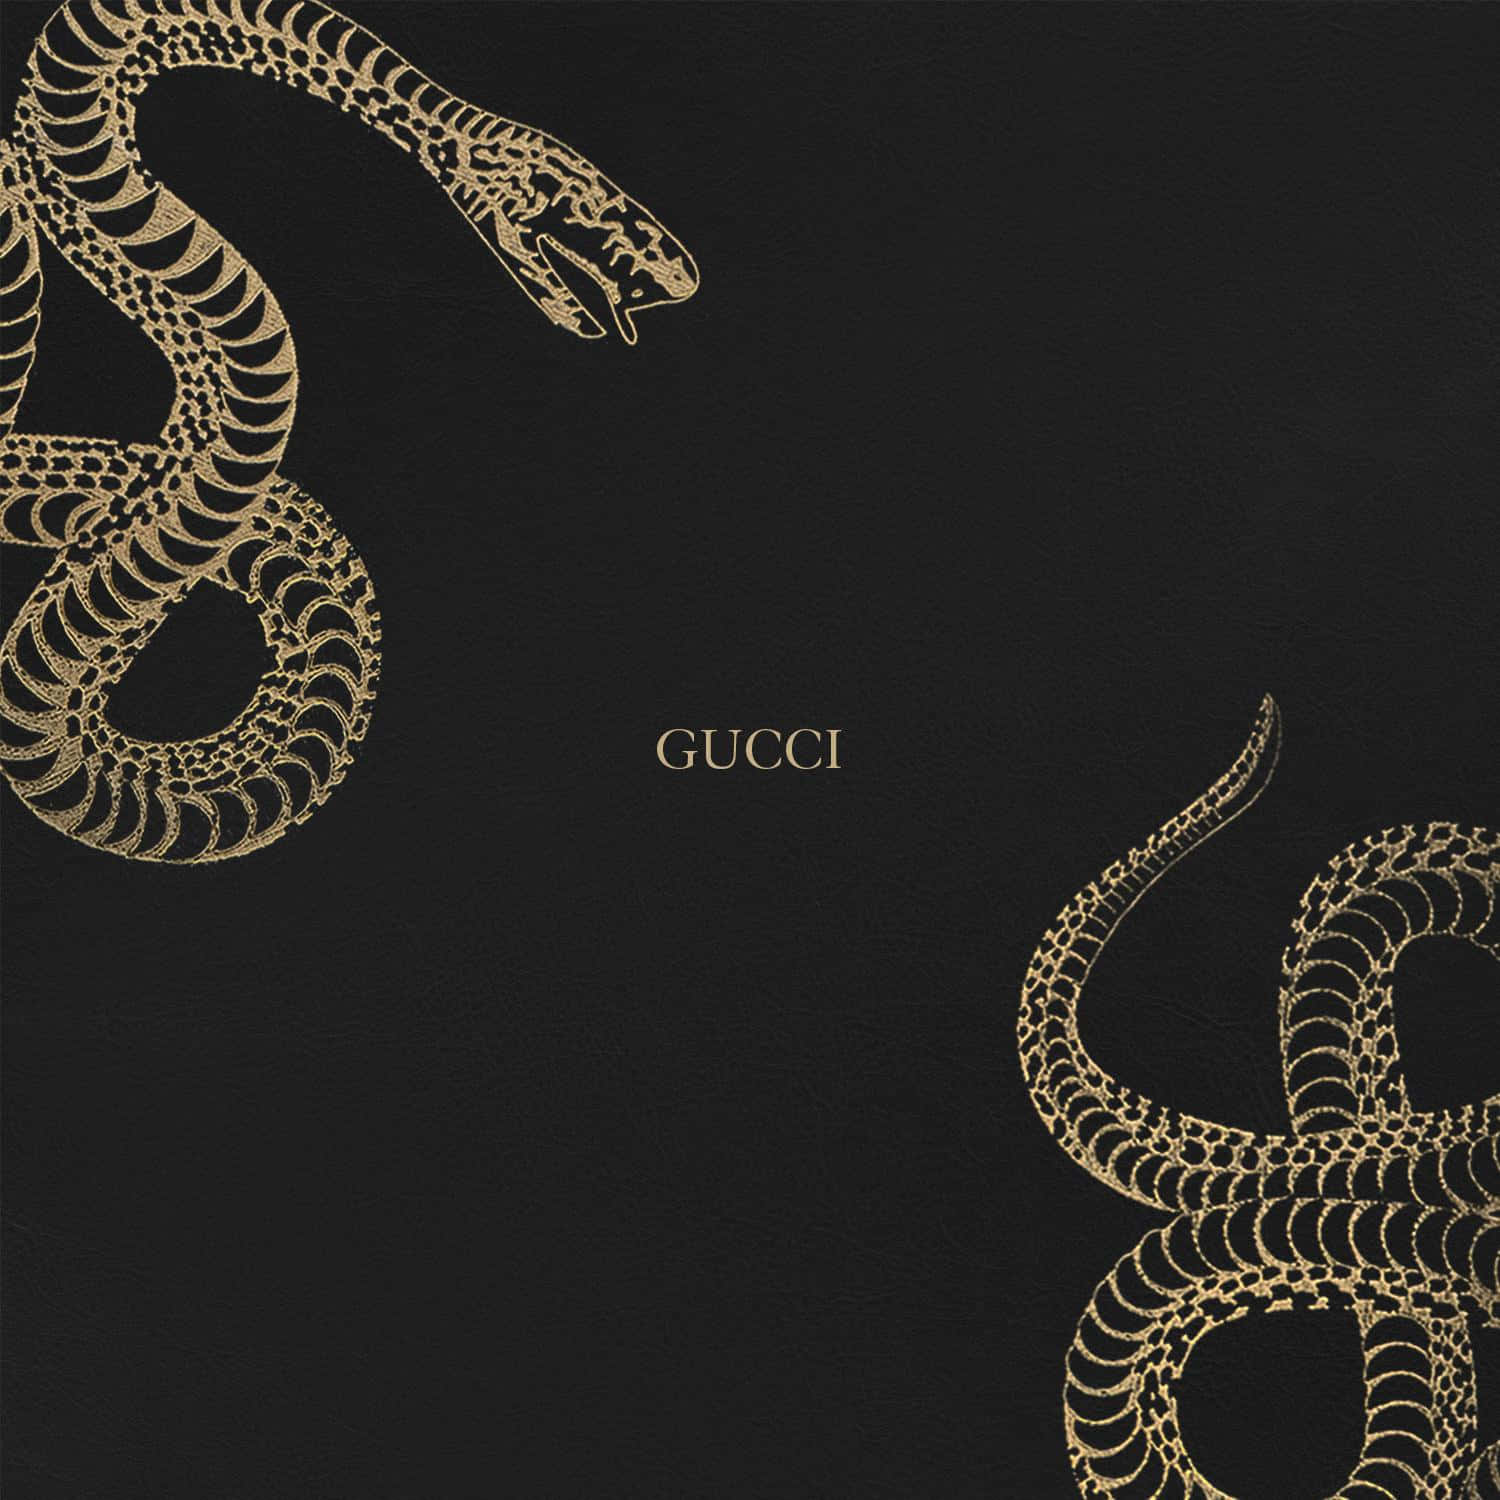 Awesome Snake Print In Gucci Text Background